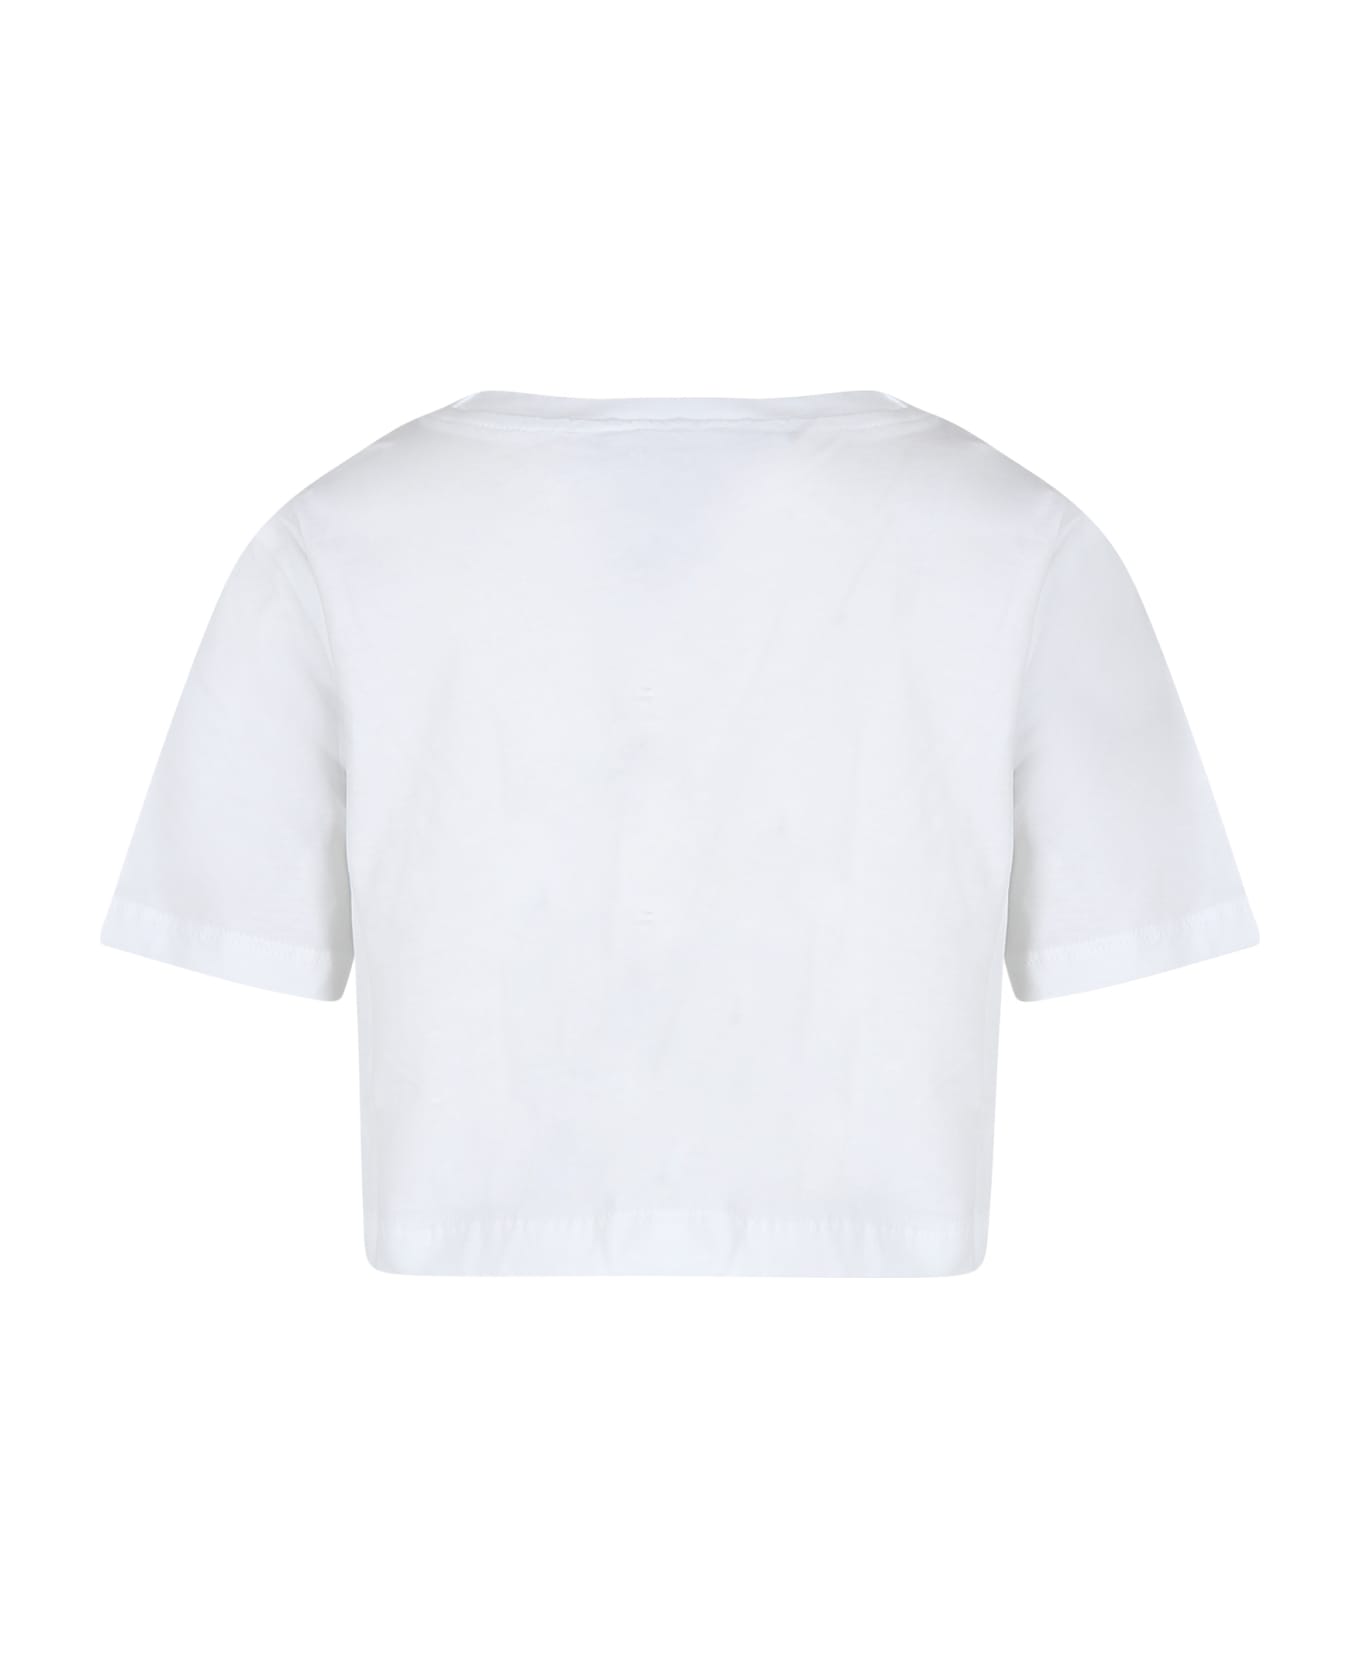 MSGM White Crop T-shirt For Girl With Logo And Ladybugs - White